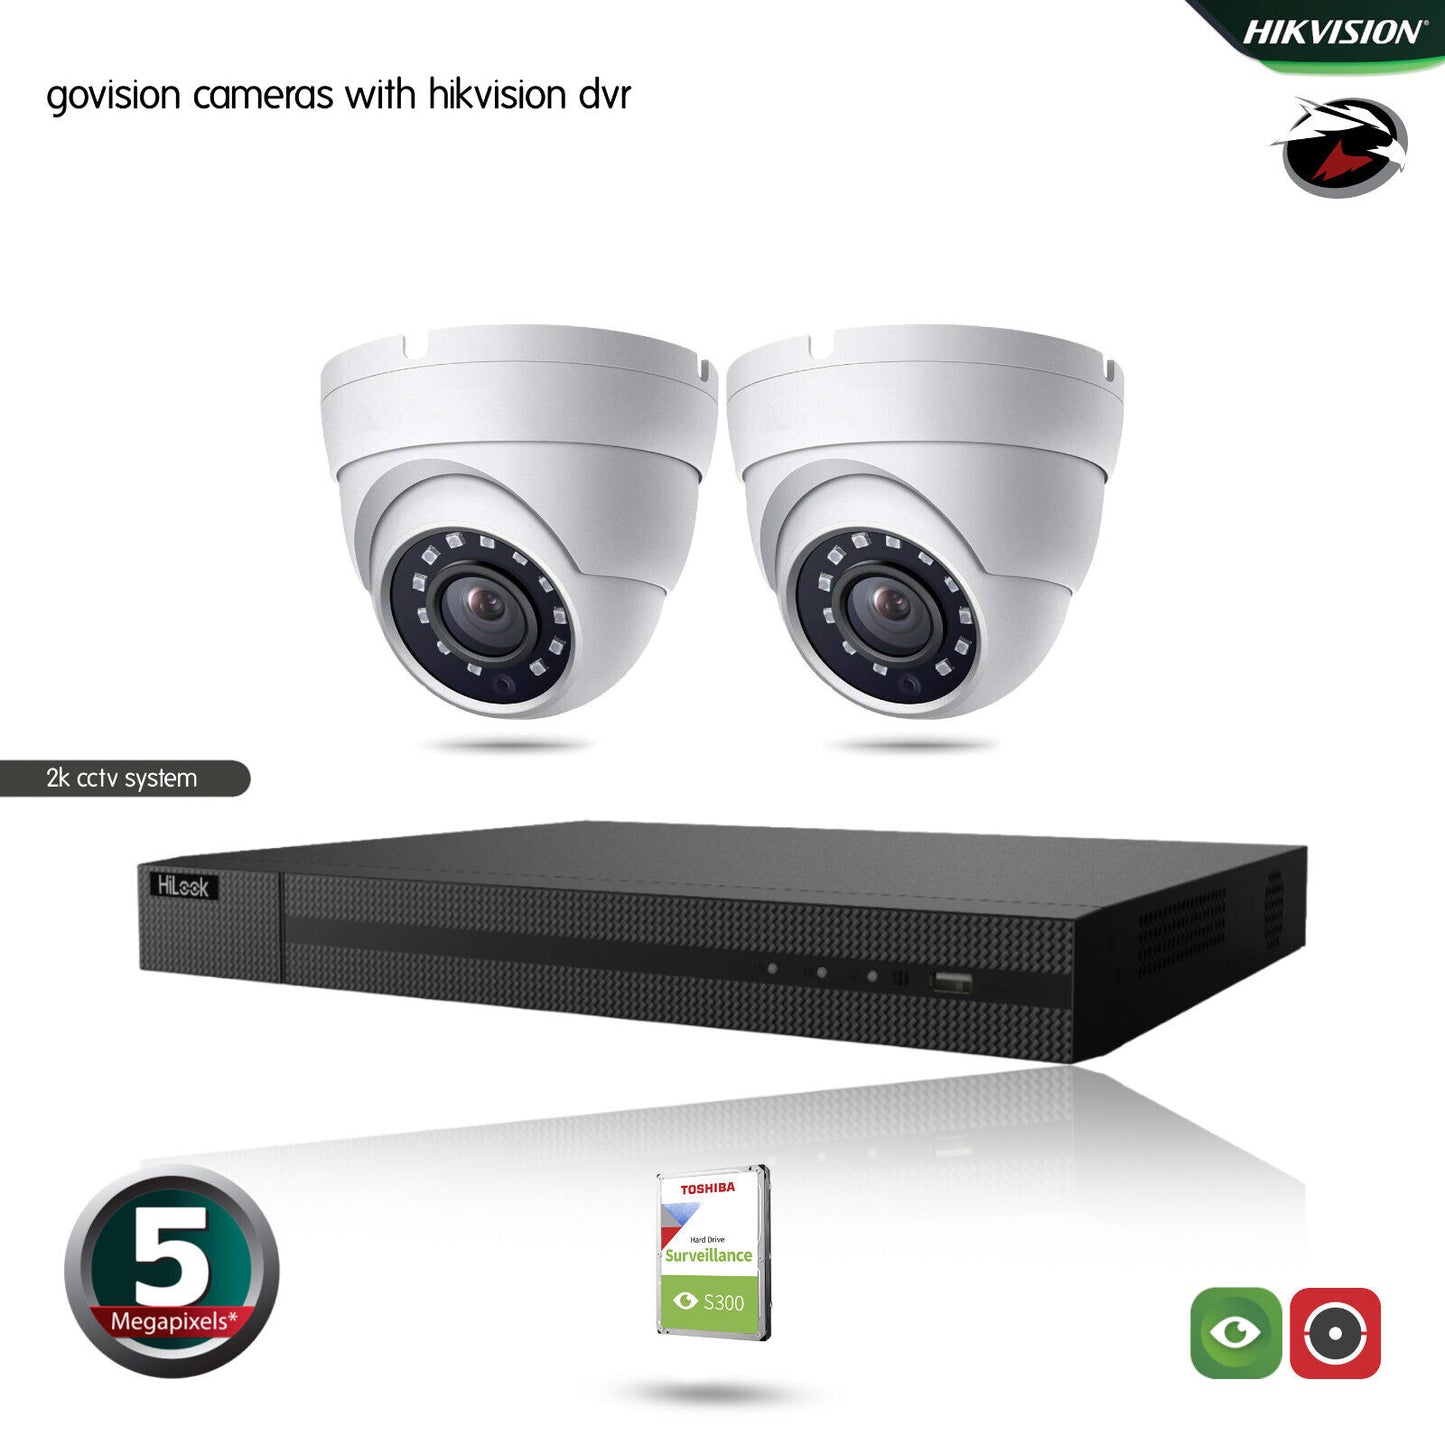 Hikvision 5MP CCTV full HD night vision outdoor DVR home security system kit UK 4ch DVR 2xCameras (white) 1TB HDD